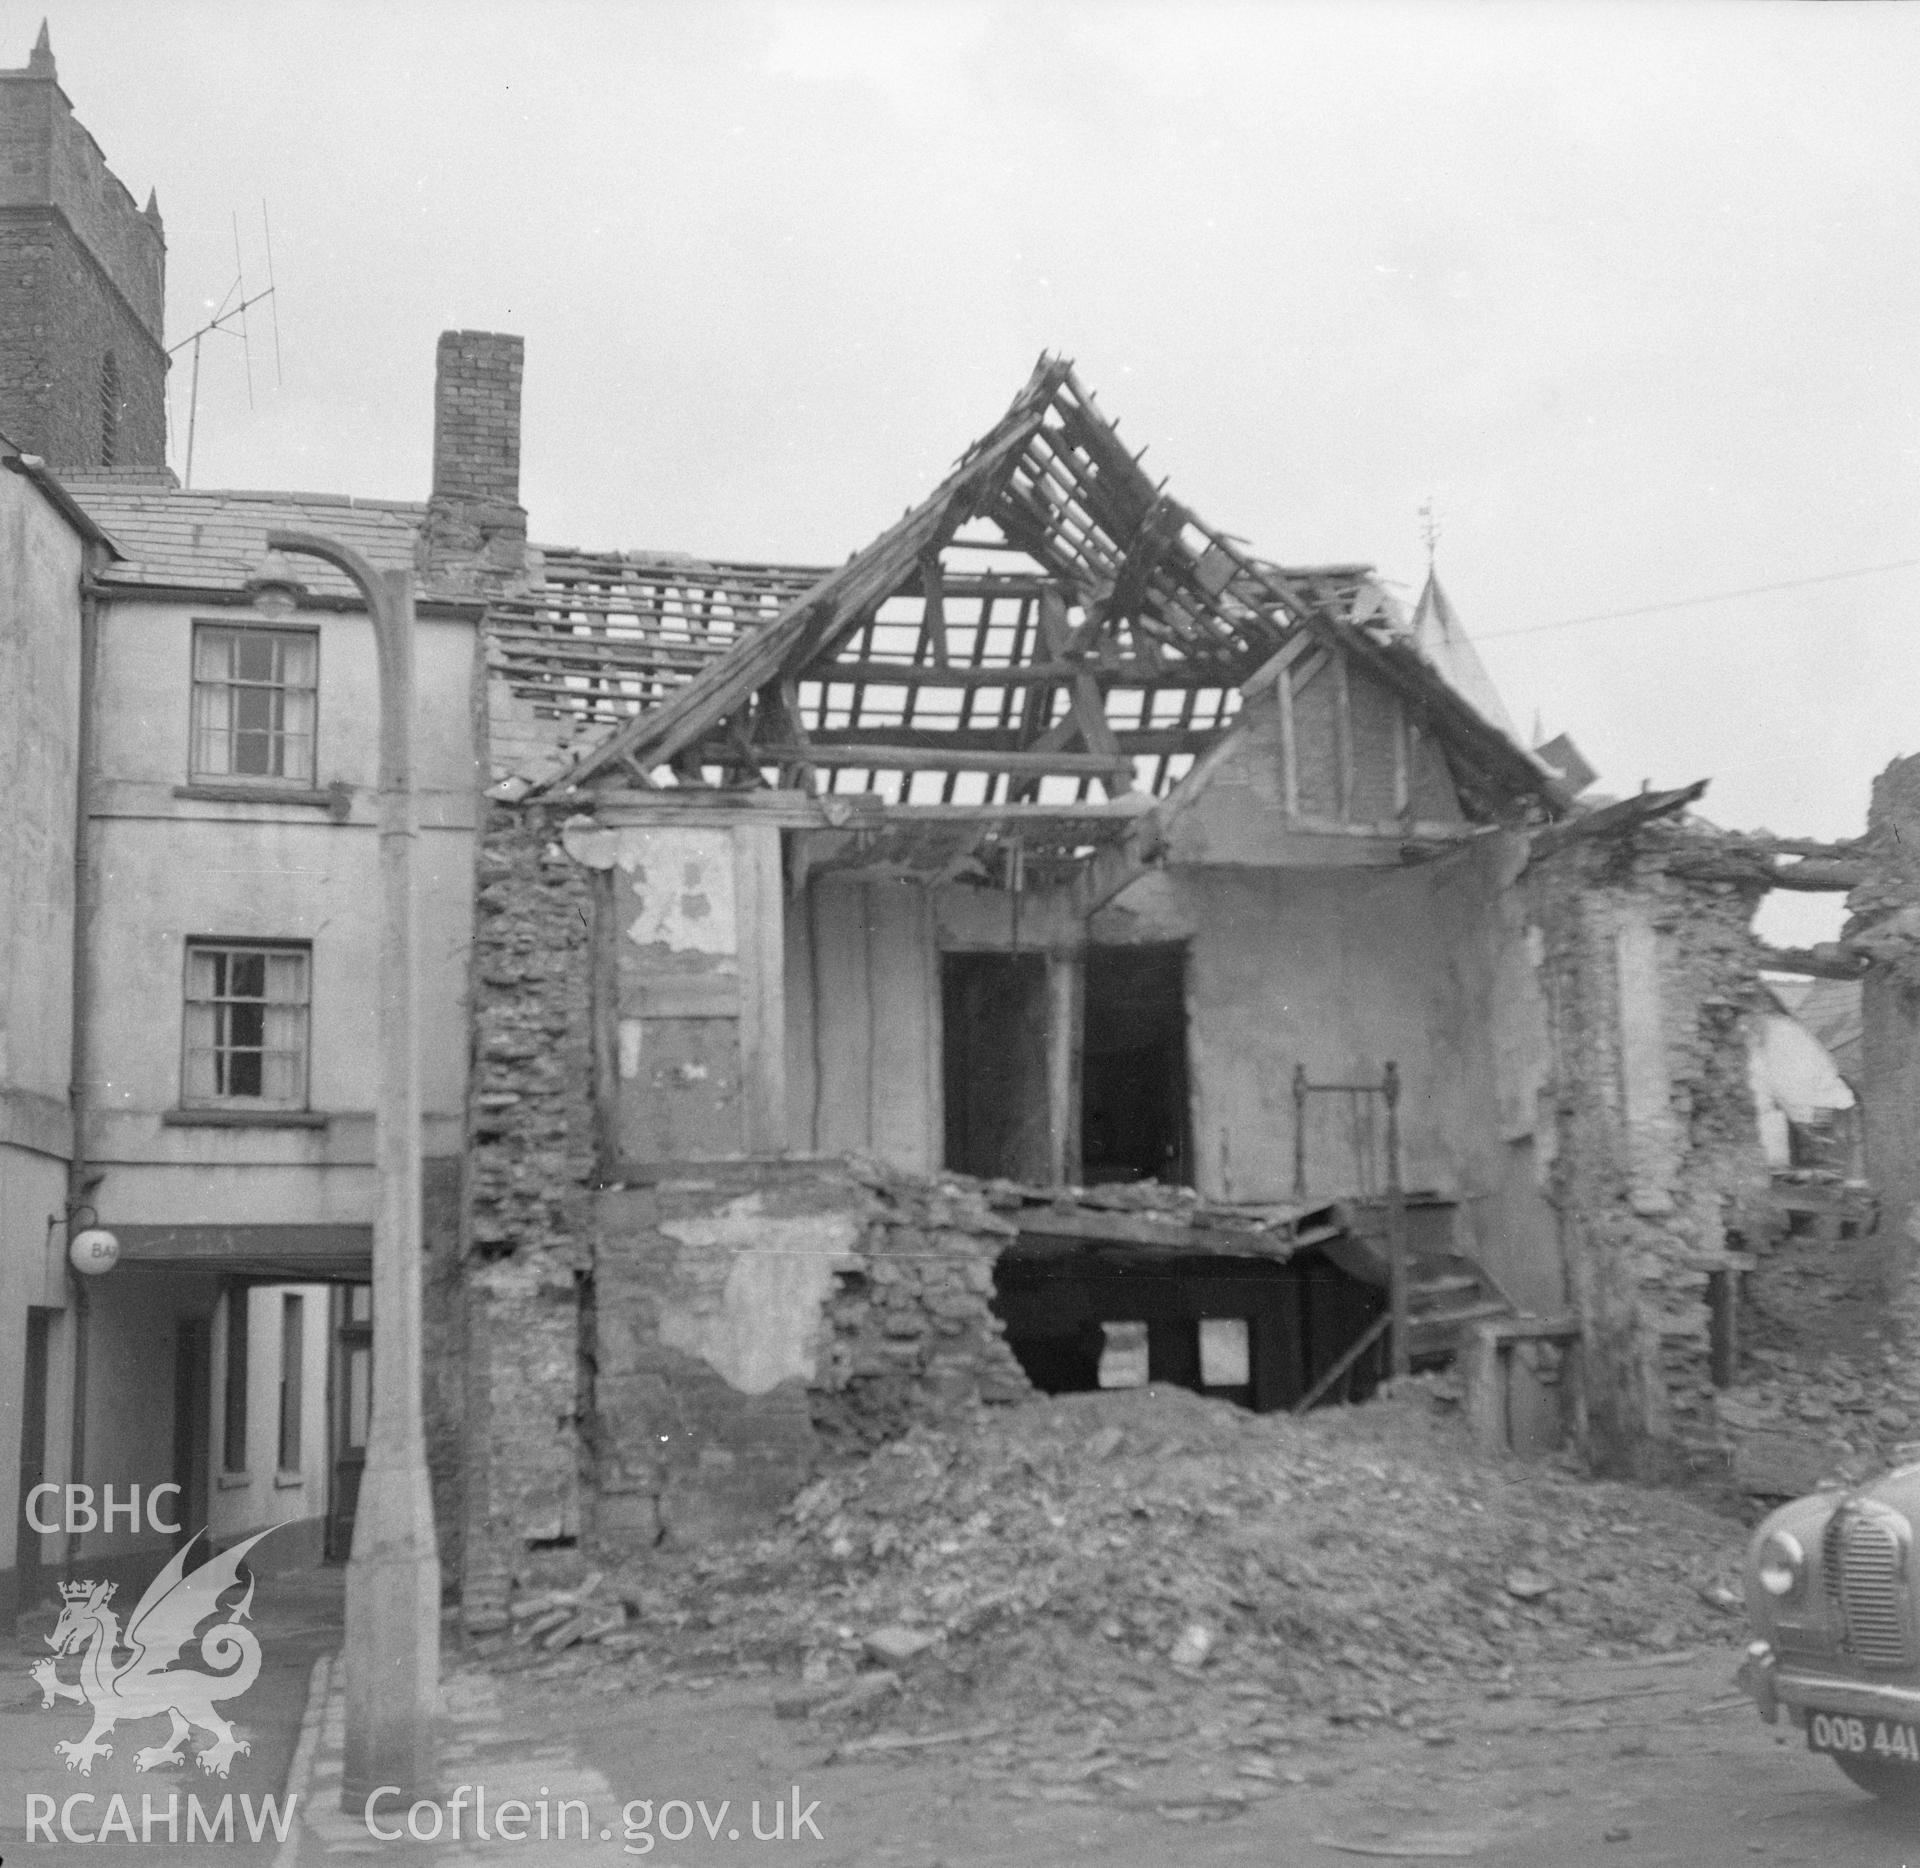 Digital copy of a nitrate negative showing view of the demolition of an unnamed house in or near Clytha.